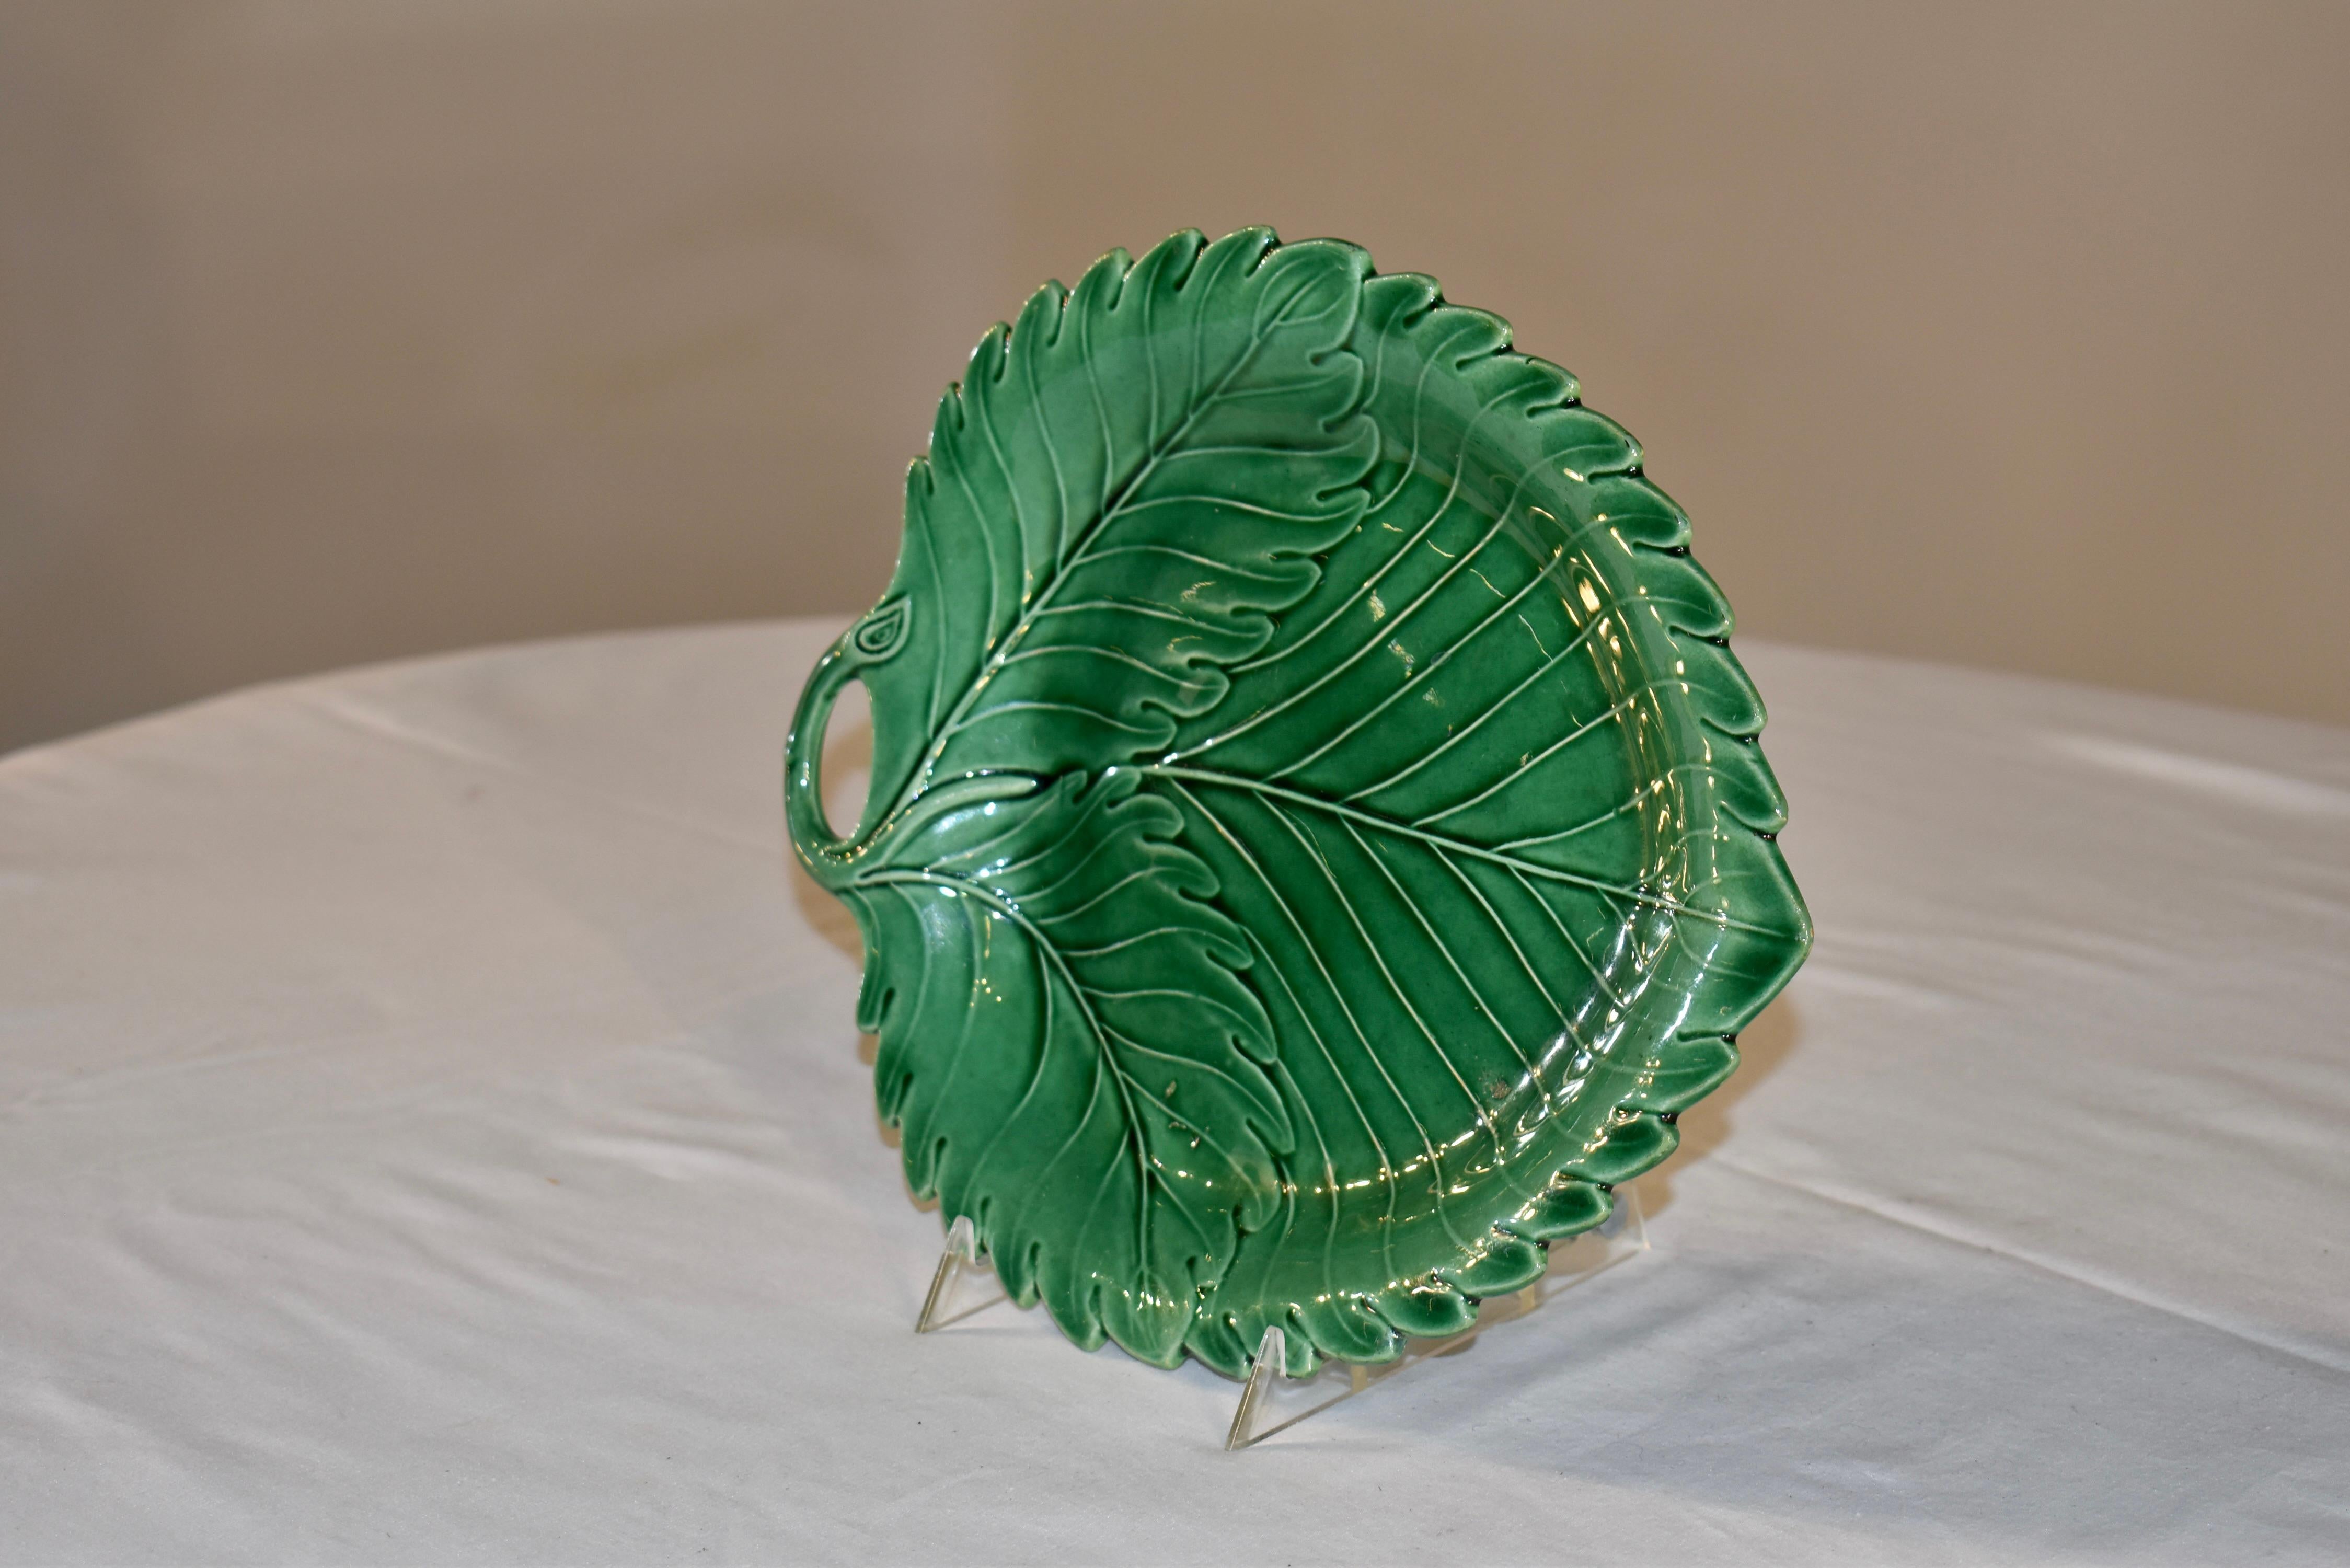 19th century majolica leaf tray with single handle from England. The leaf has a wonderful and crisp mold. The edges are scalloped and the handle is molded like a stem of the leaf. Lovely and handy dish for any table.